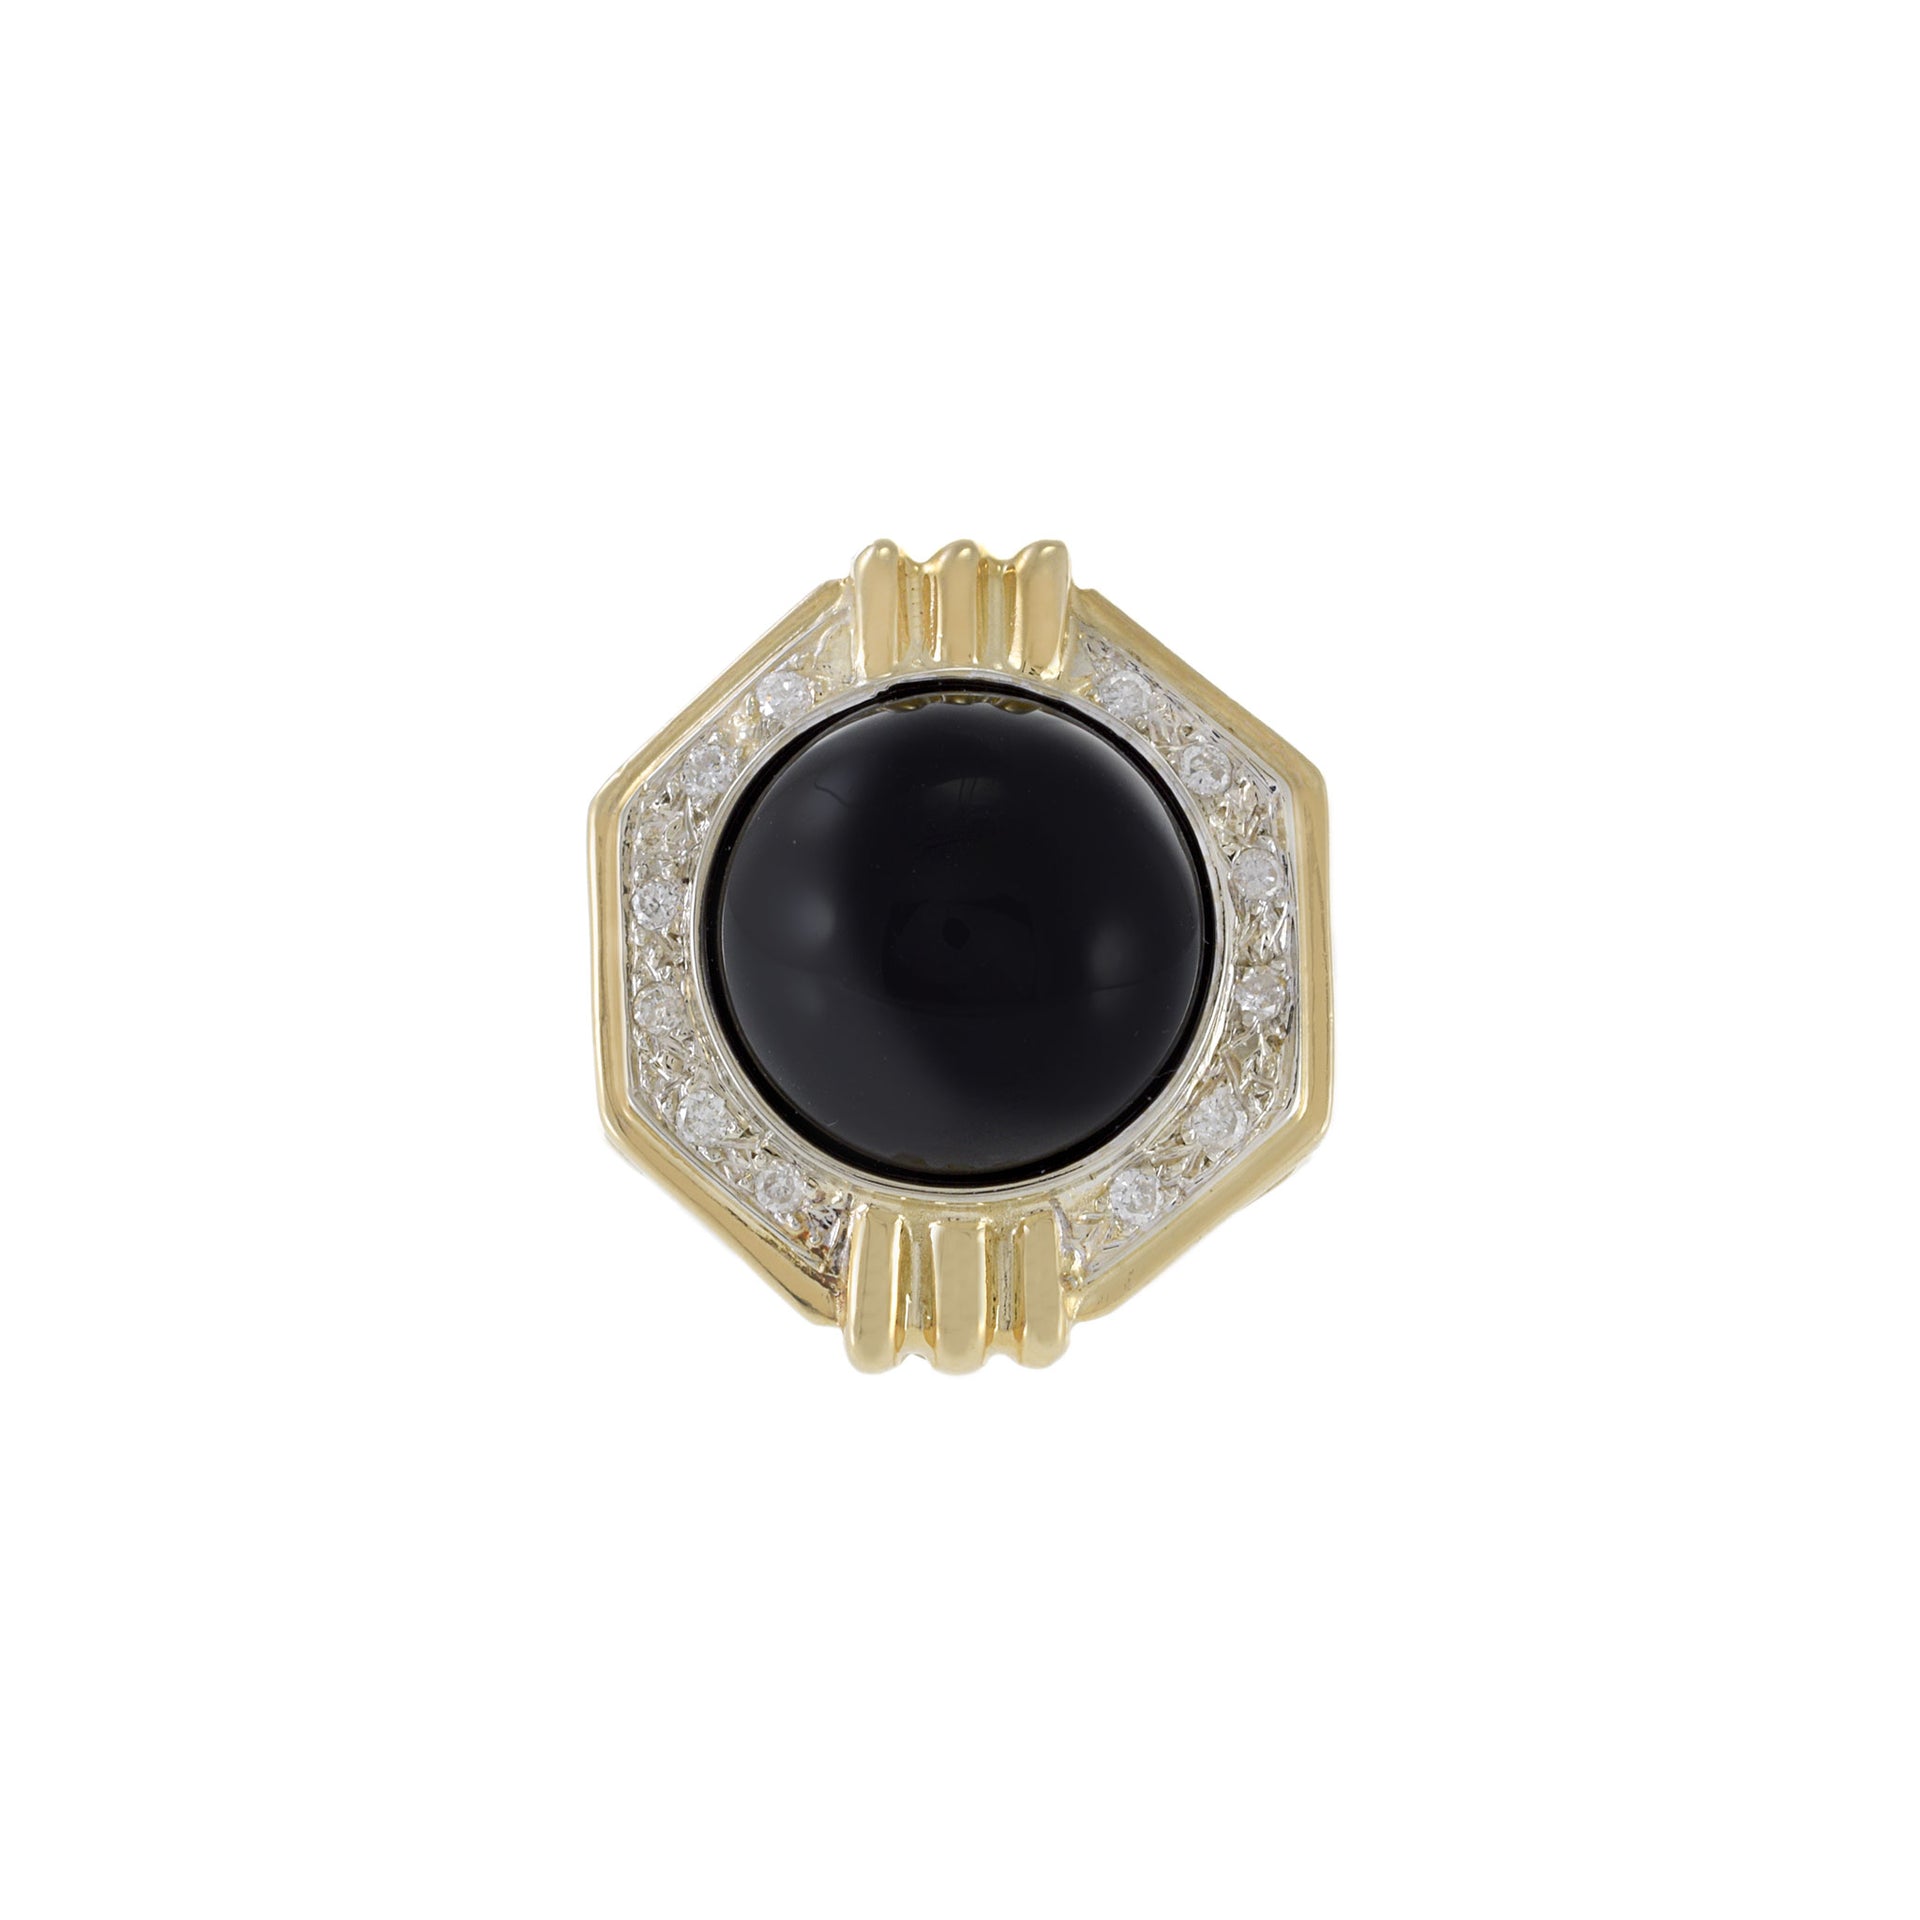 Vintage 1970s 14KT Yellow Gold Diamond and Black Onyx Ring